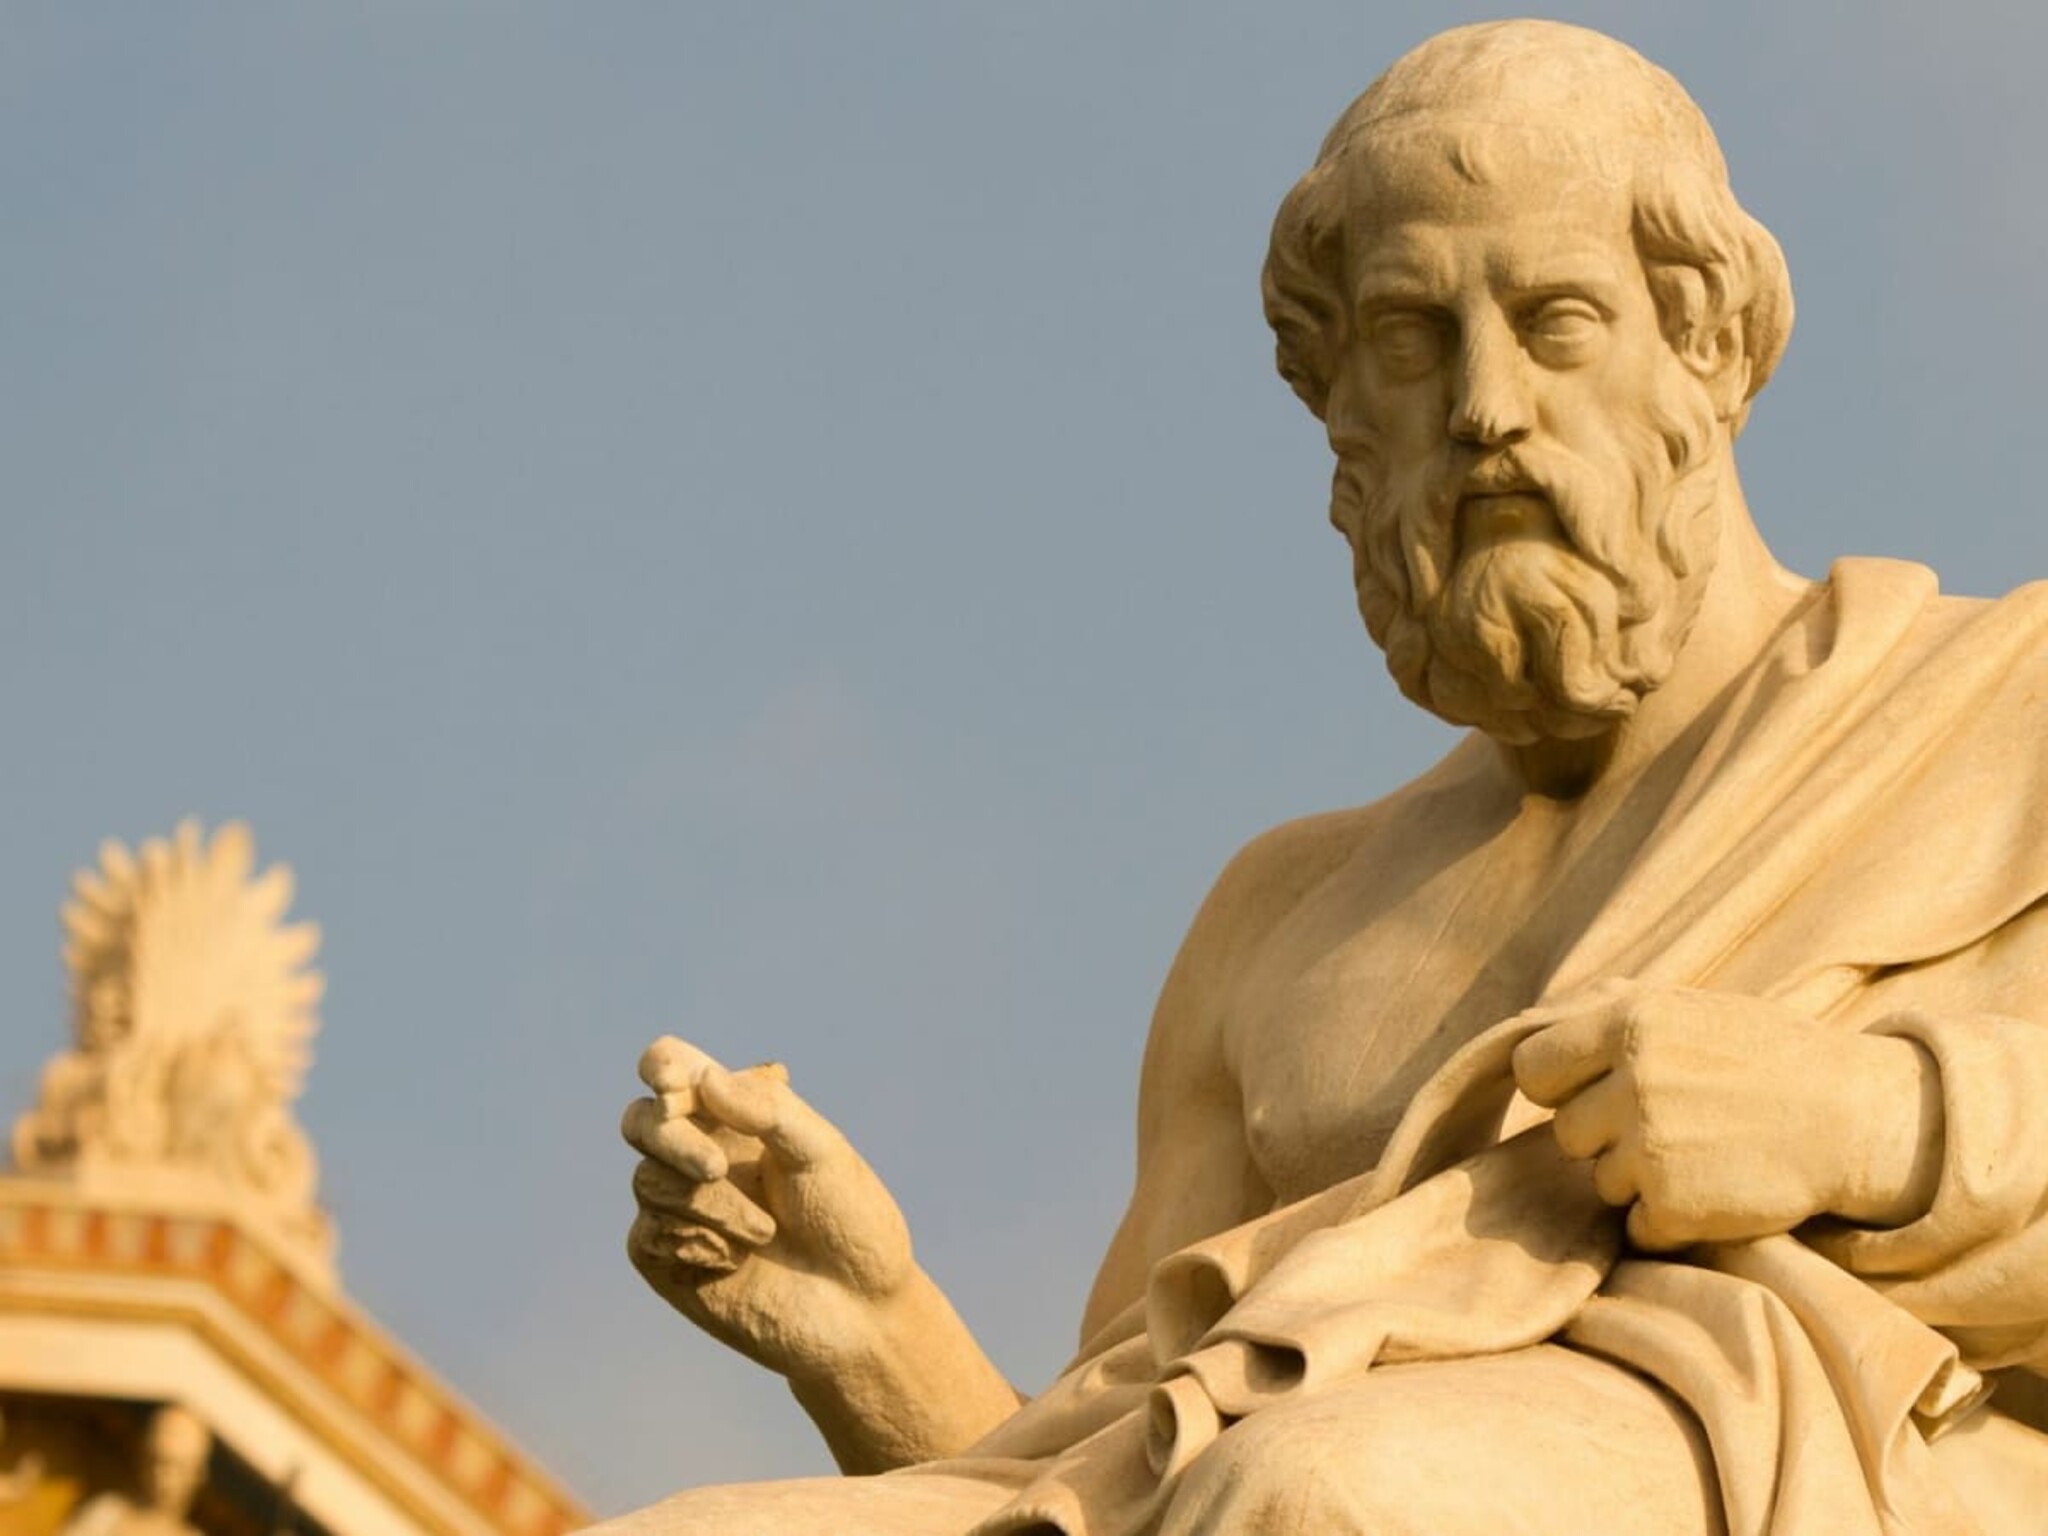 Artificial intelligence reveals the location of Plato's grave